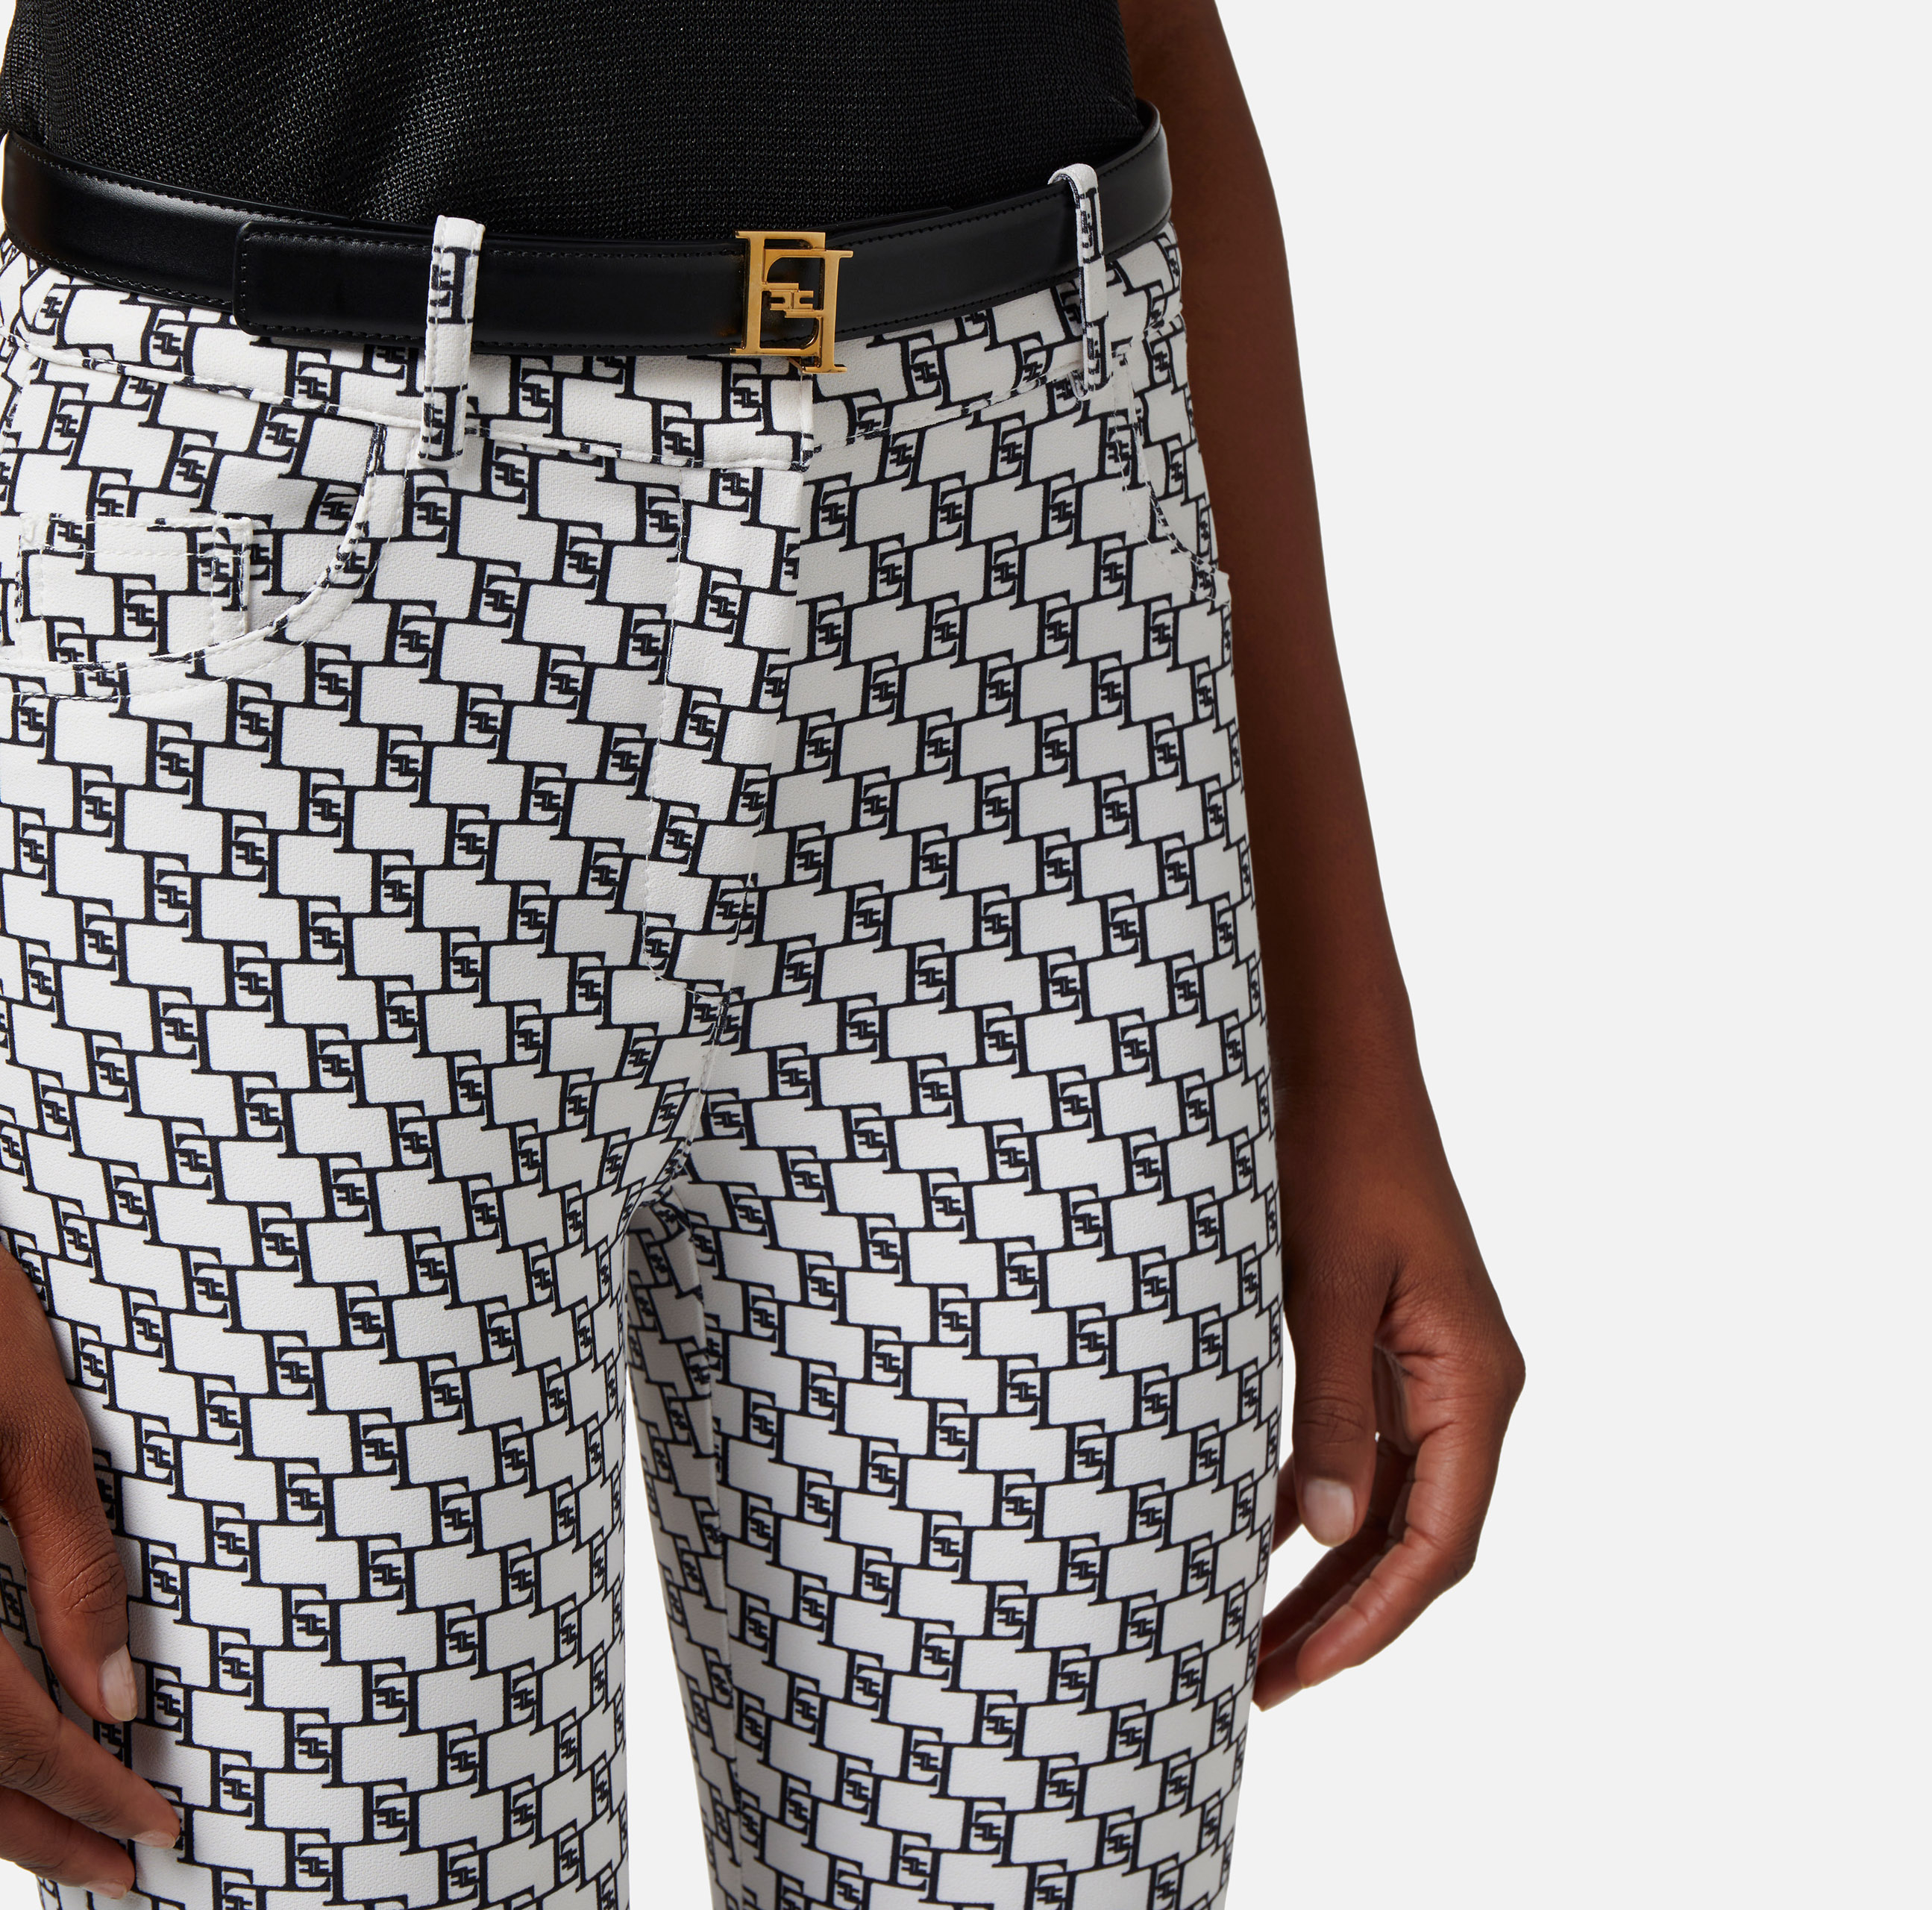 Five-pocket trousers in double layer crêpe fabric with logo print - Elisabetta Franchi